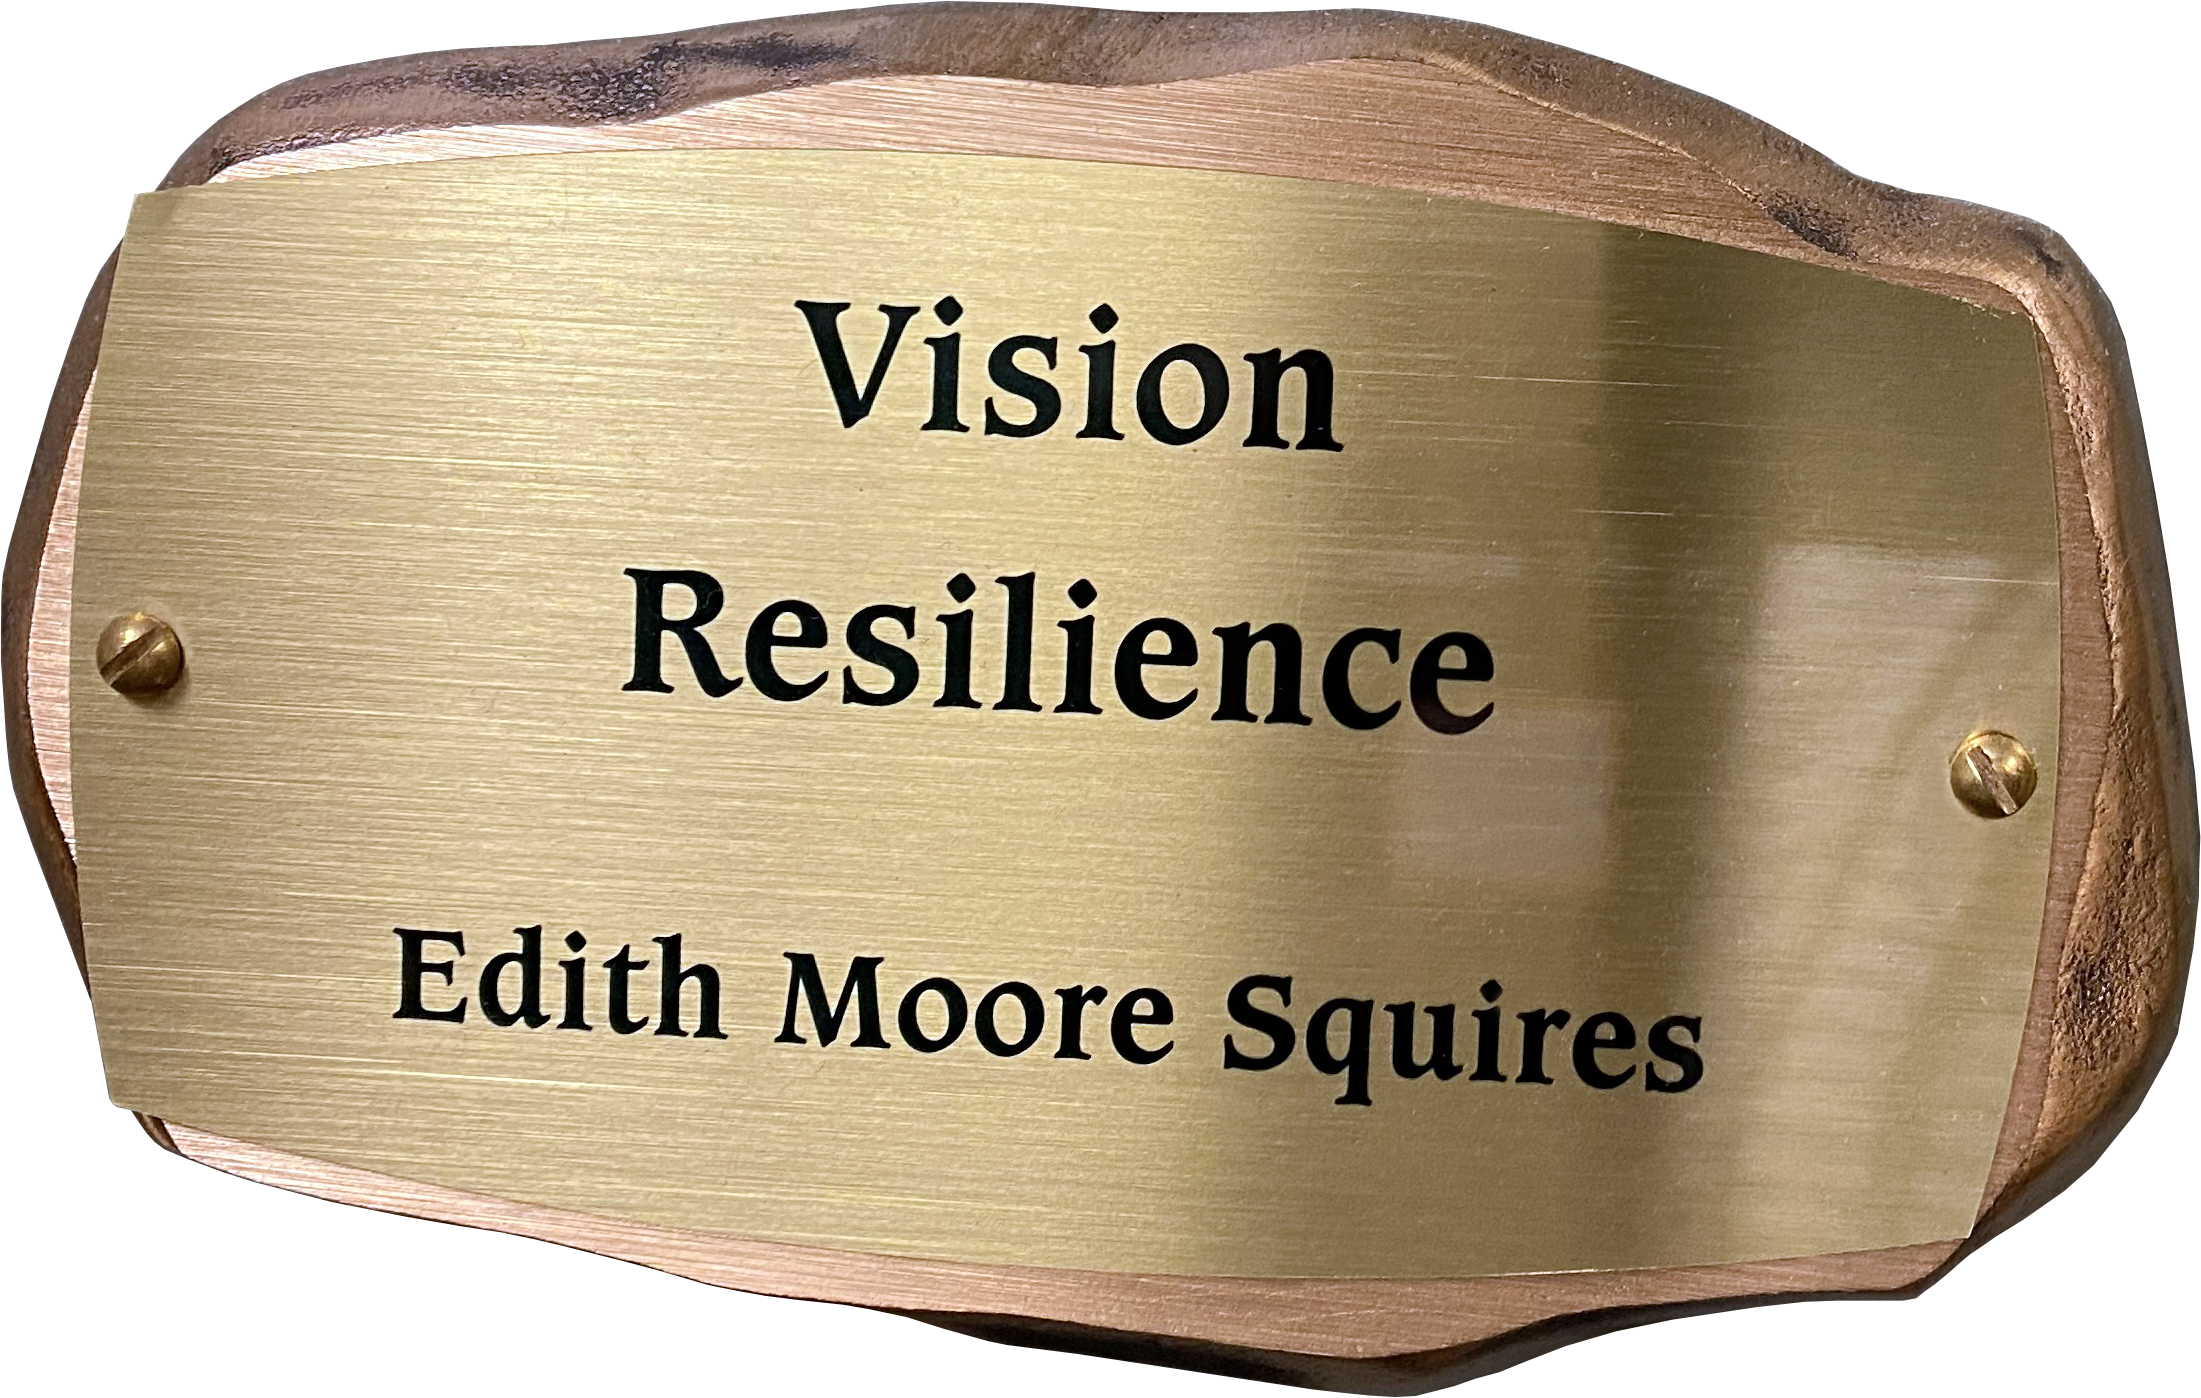 Inscribed bronze plaque in the shape of a rock with text on it reading: Vision, Resilience. Edith Moore Squires